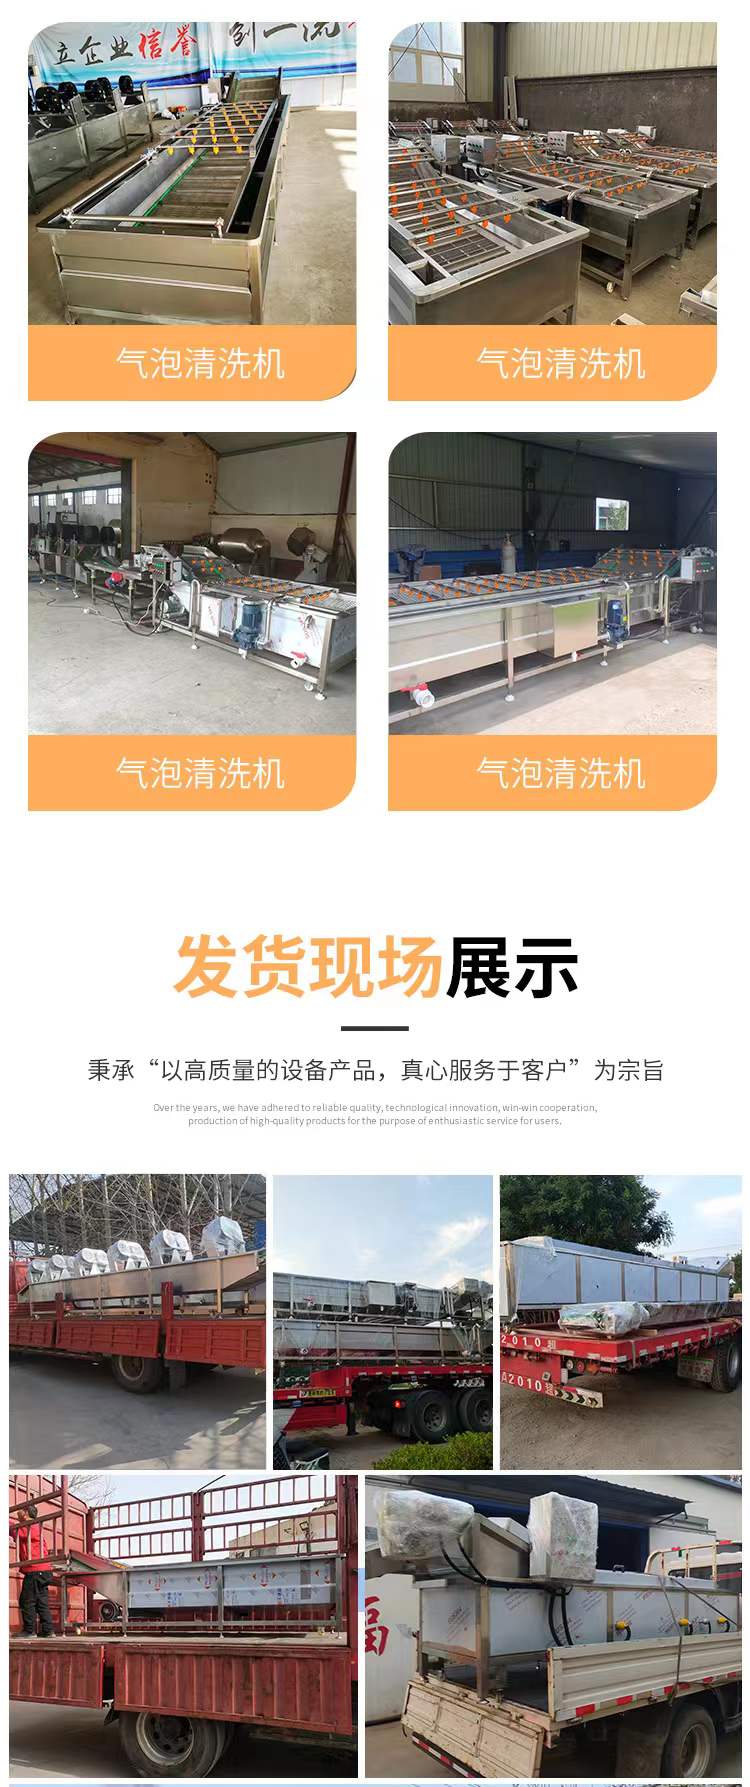 Fully automatic spinach, radish, cabbage, potato, and sweet potato cleaning machine, stainless steel high-pressure spray type vegetable cleaning processing equipment